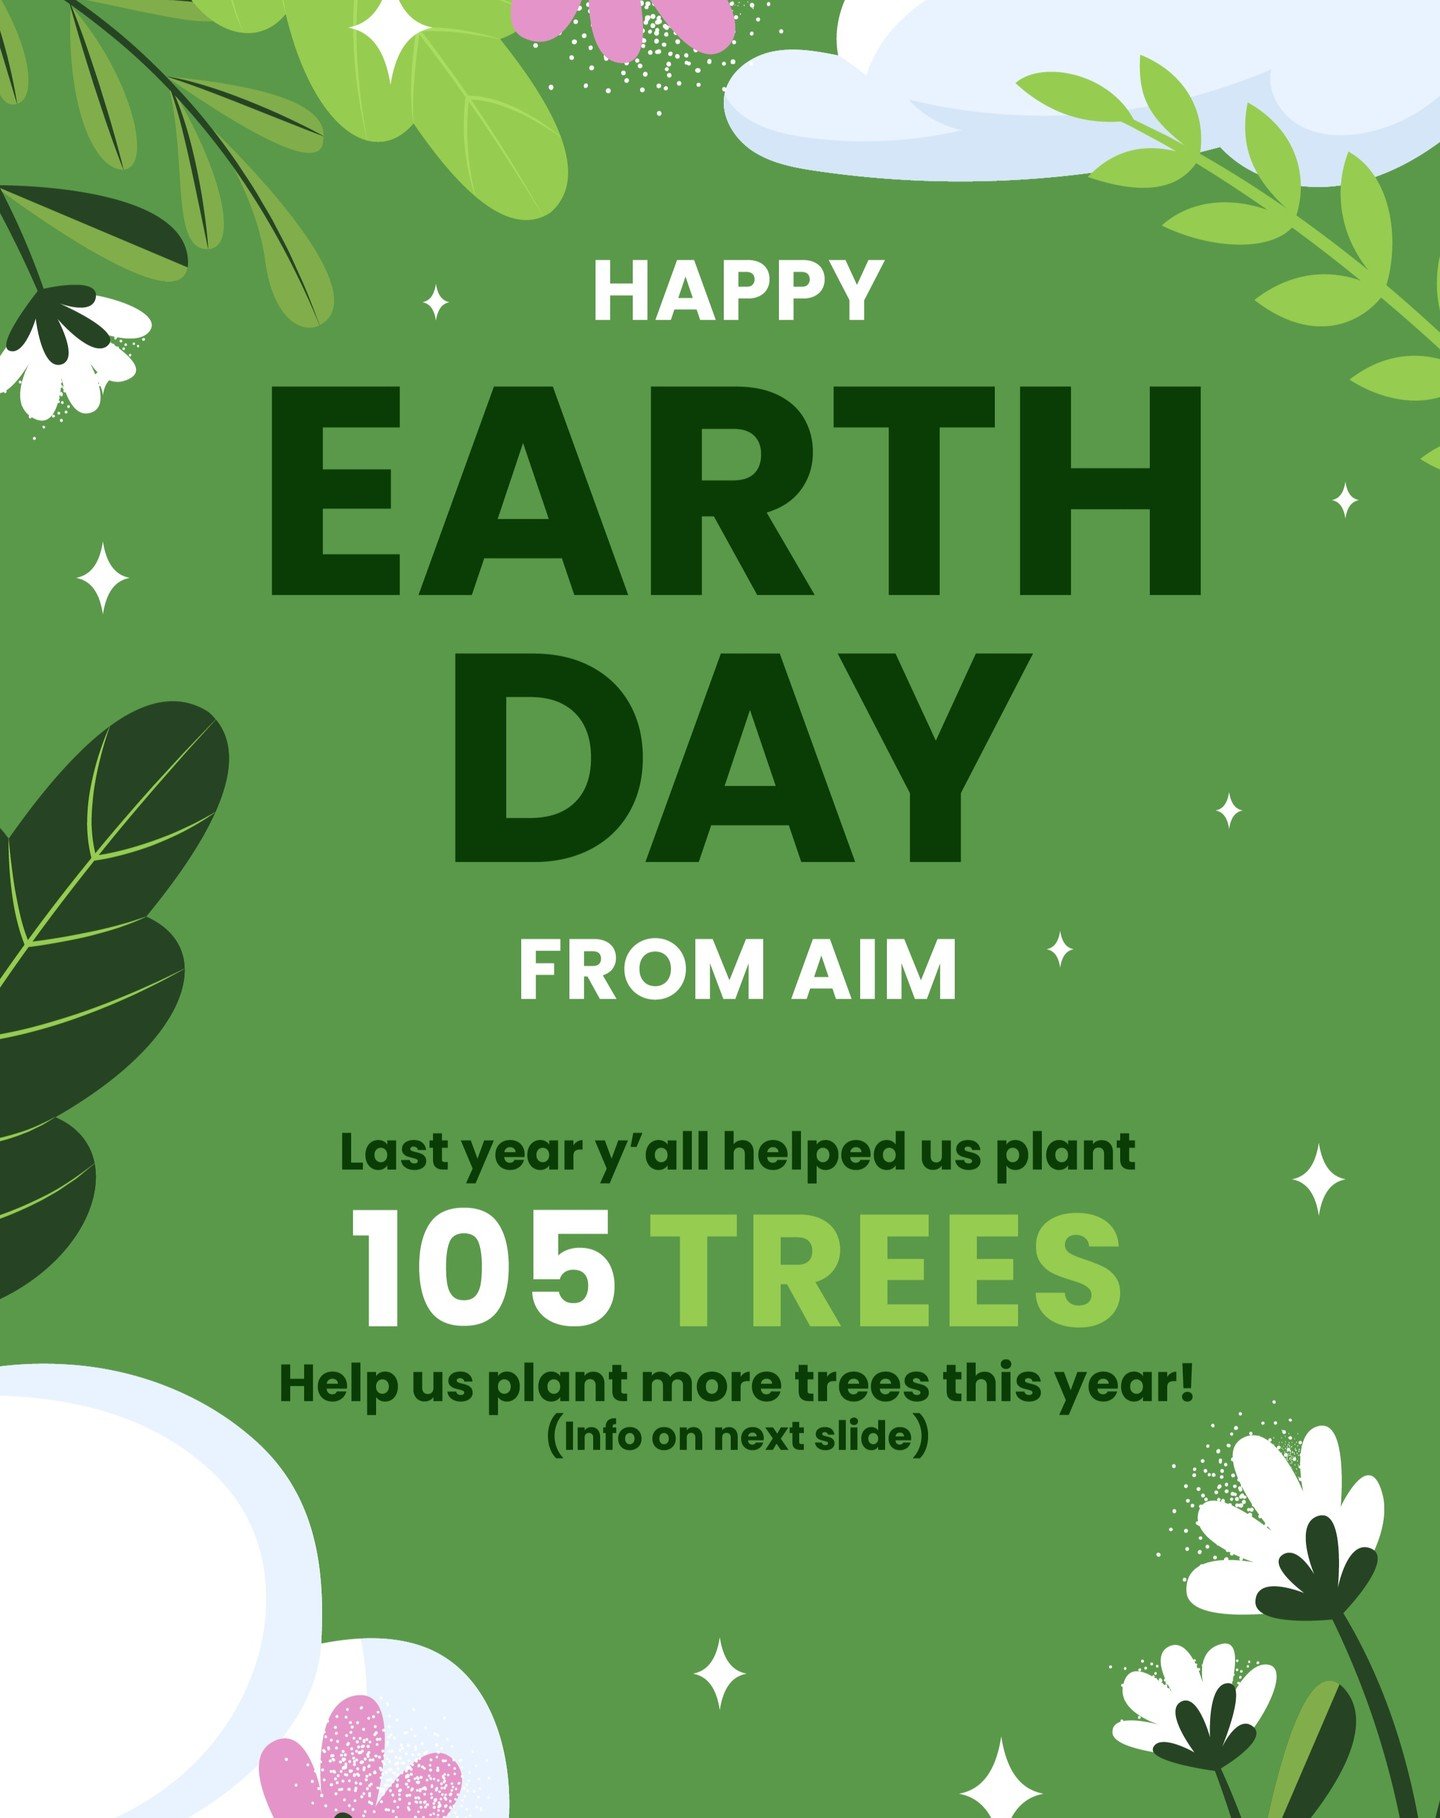 Happy Earth Day! This year, AIM will be giving a tree for a tree. For every repost of the second slide today, AIM will be donating a tree! Please share this post to your stories so you can help AIM plant more trees than last year! #aim #aimeducate #e